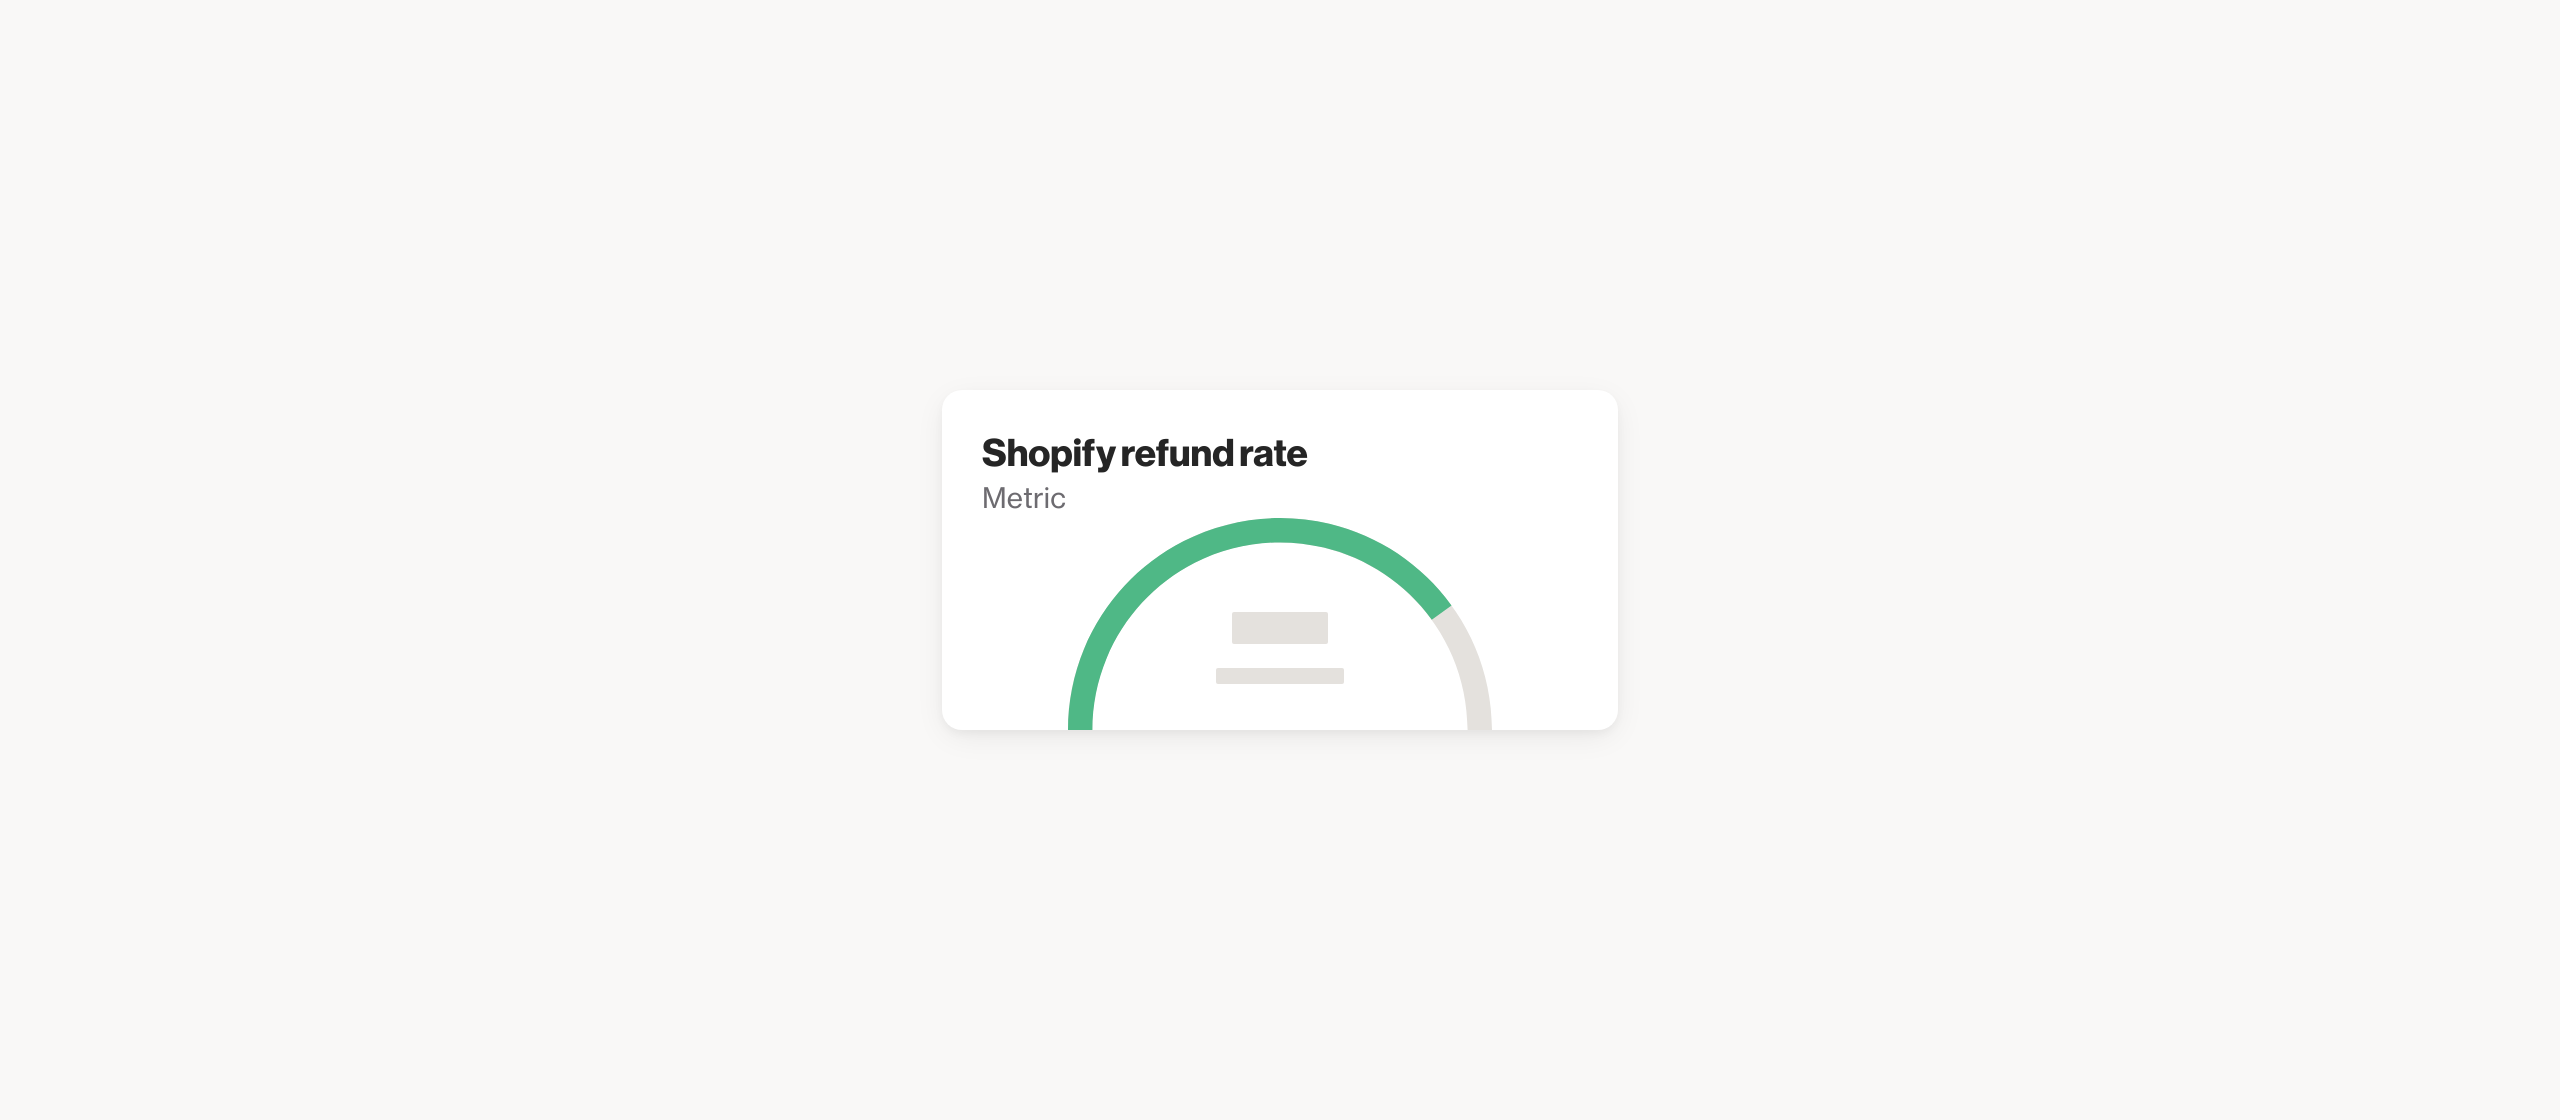 Shopify refund rate